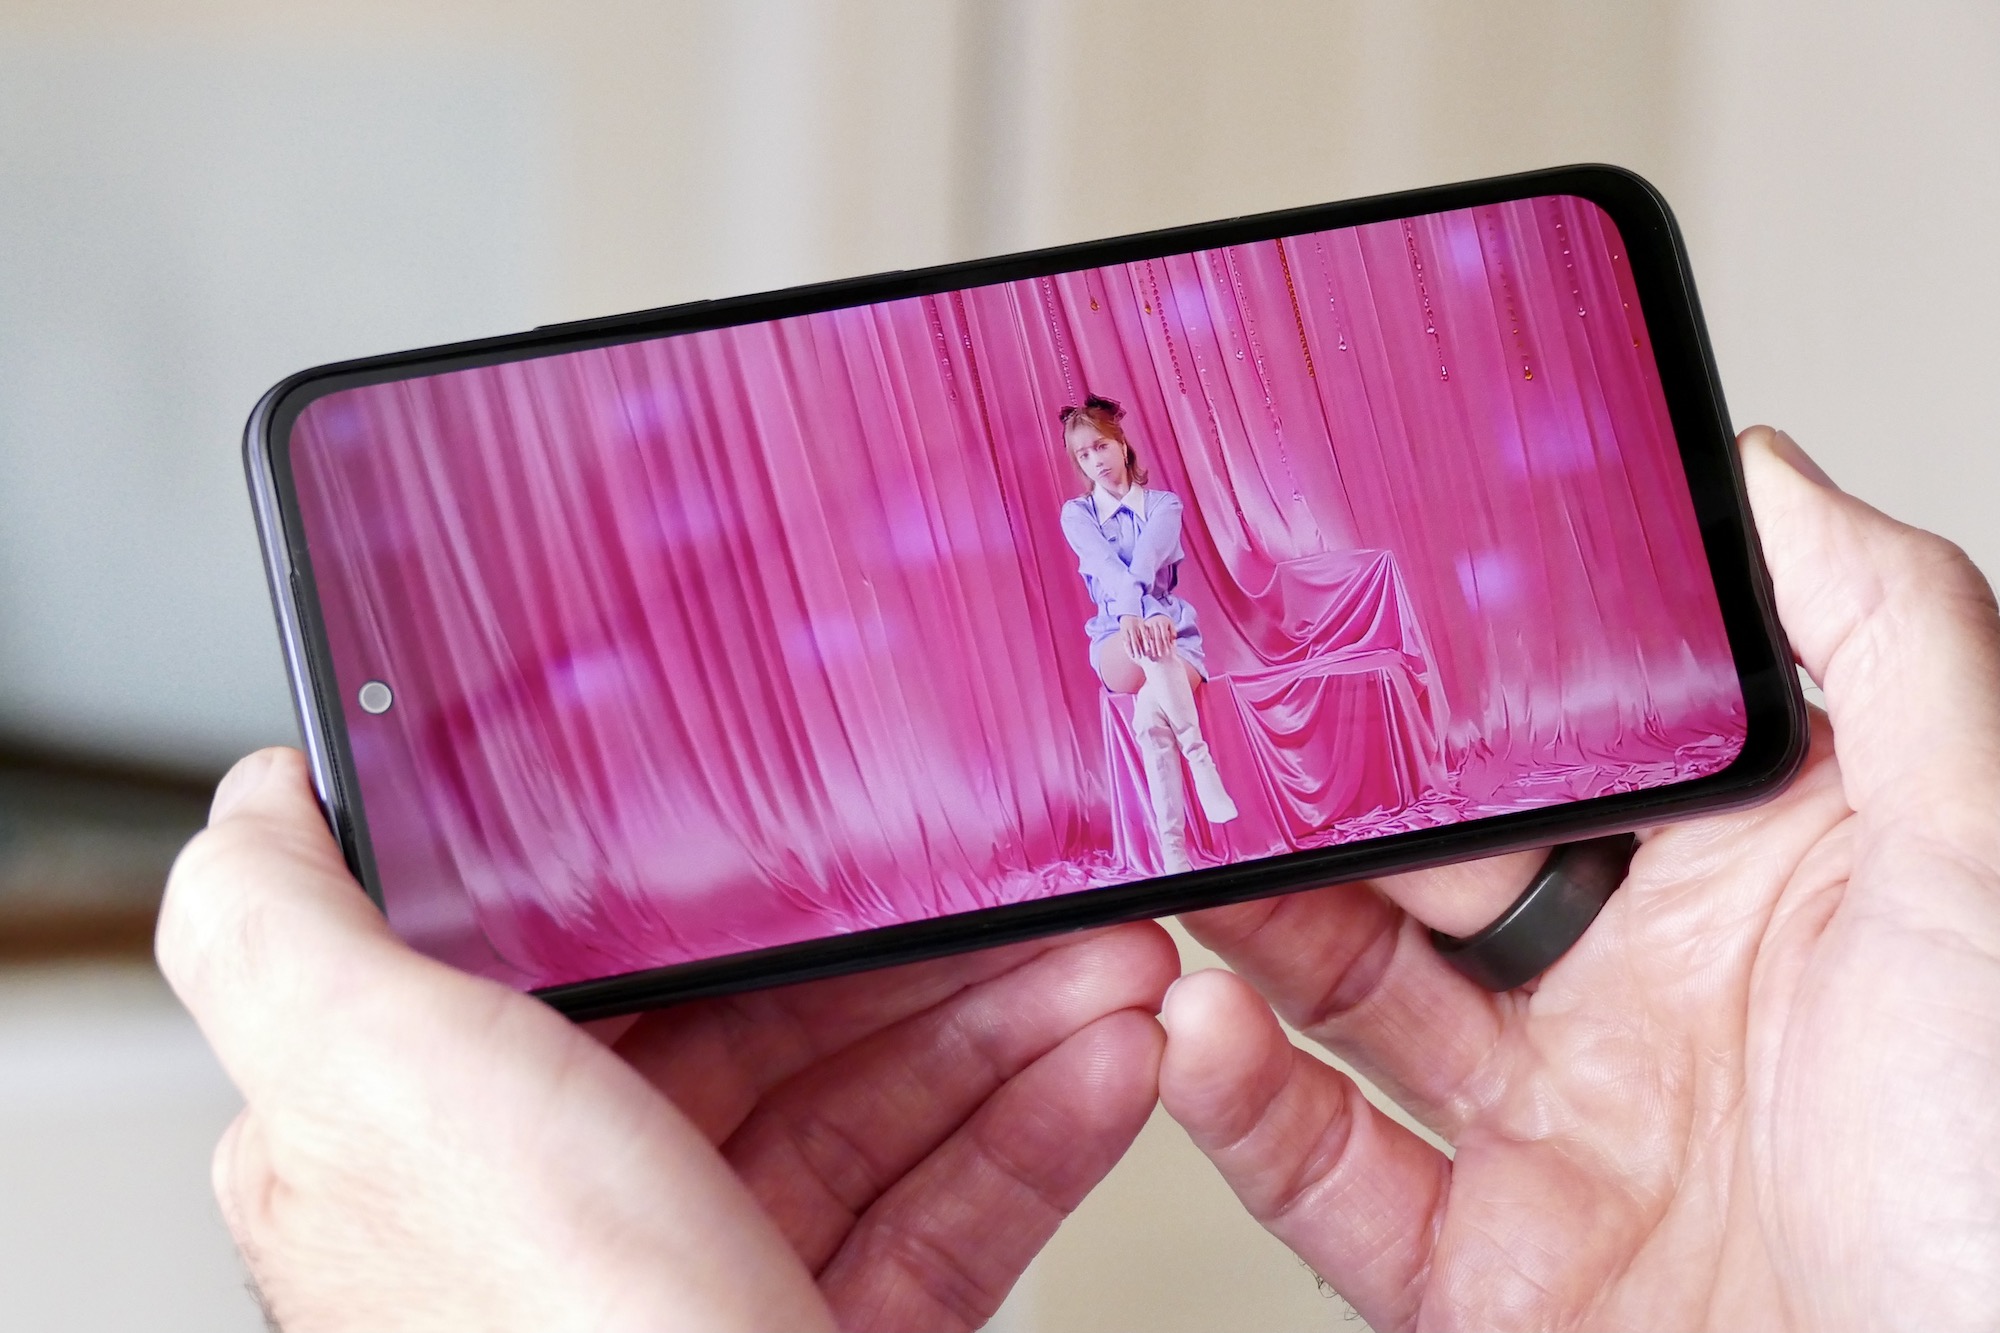 Video playing on the Xiaomi Redmi Note 10S.